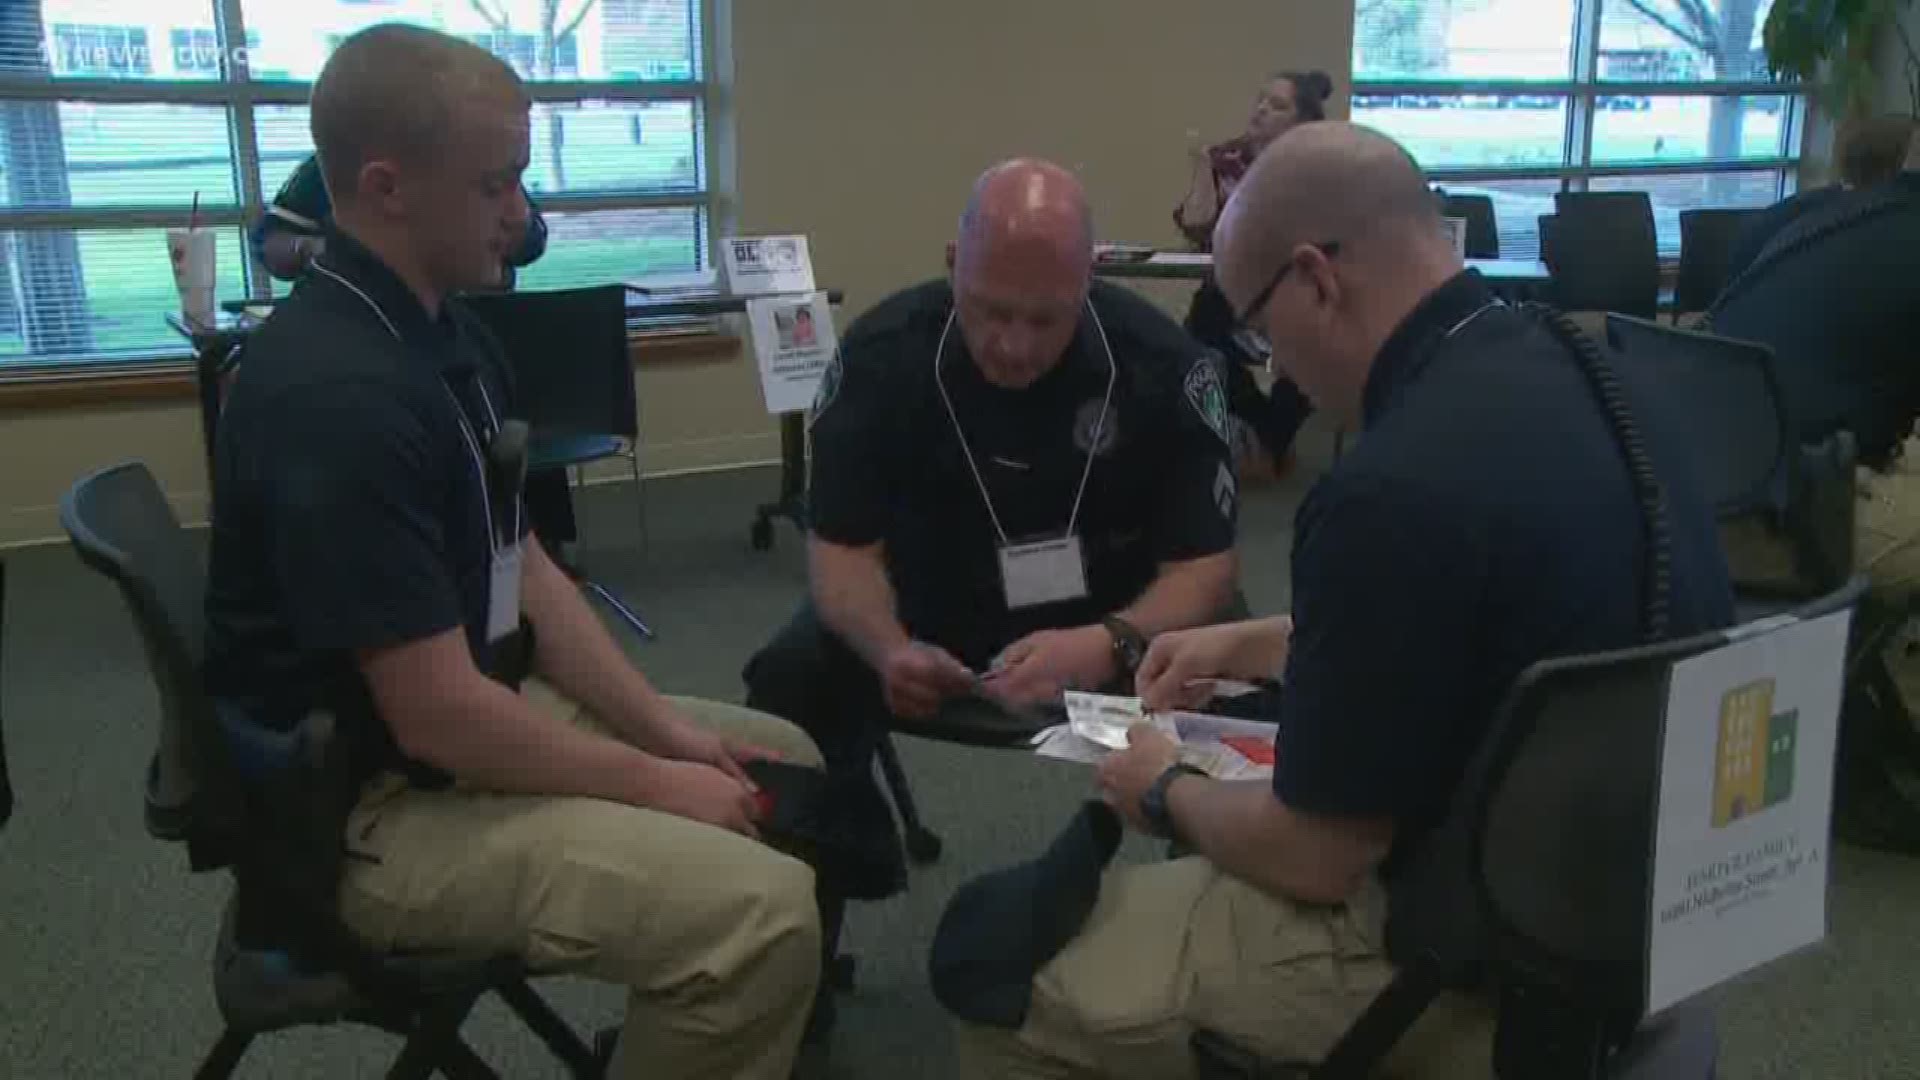 Police in Newport News are learning first hand what it's like to live in poverty.